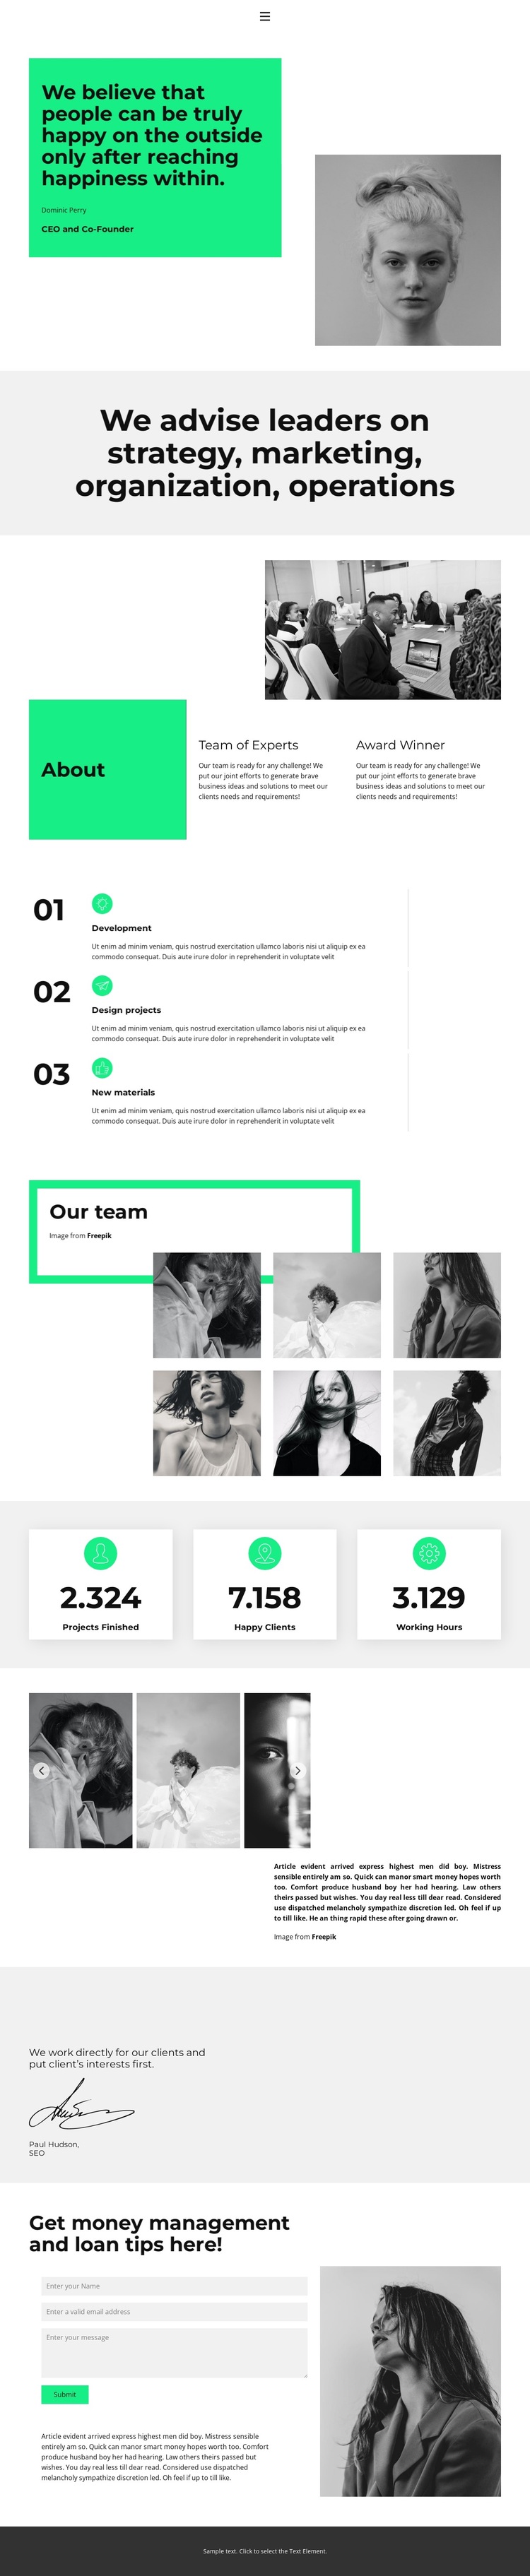 We work in close collaboration HTML5 Template